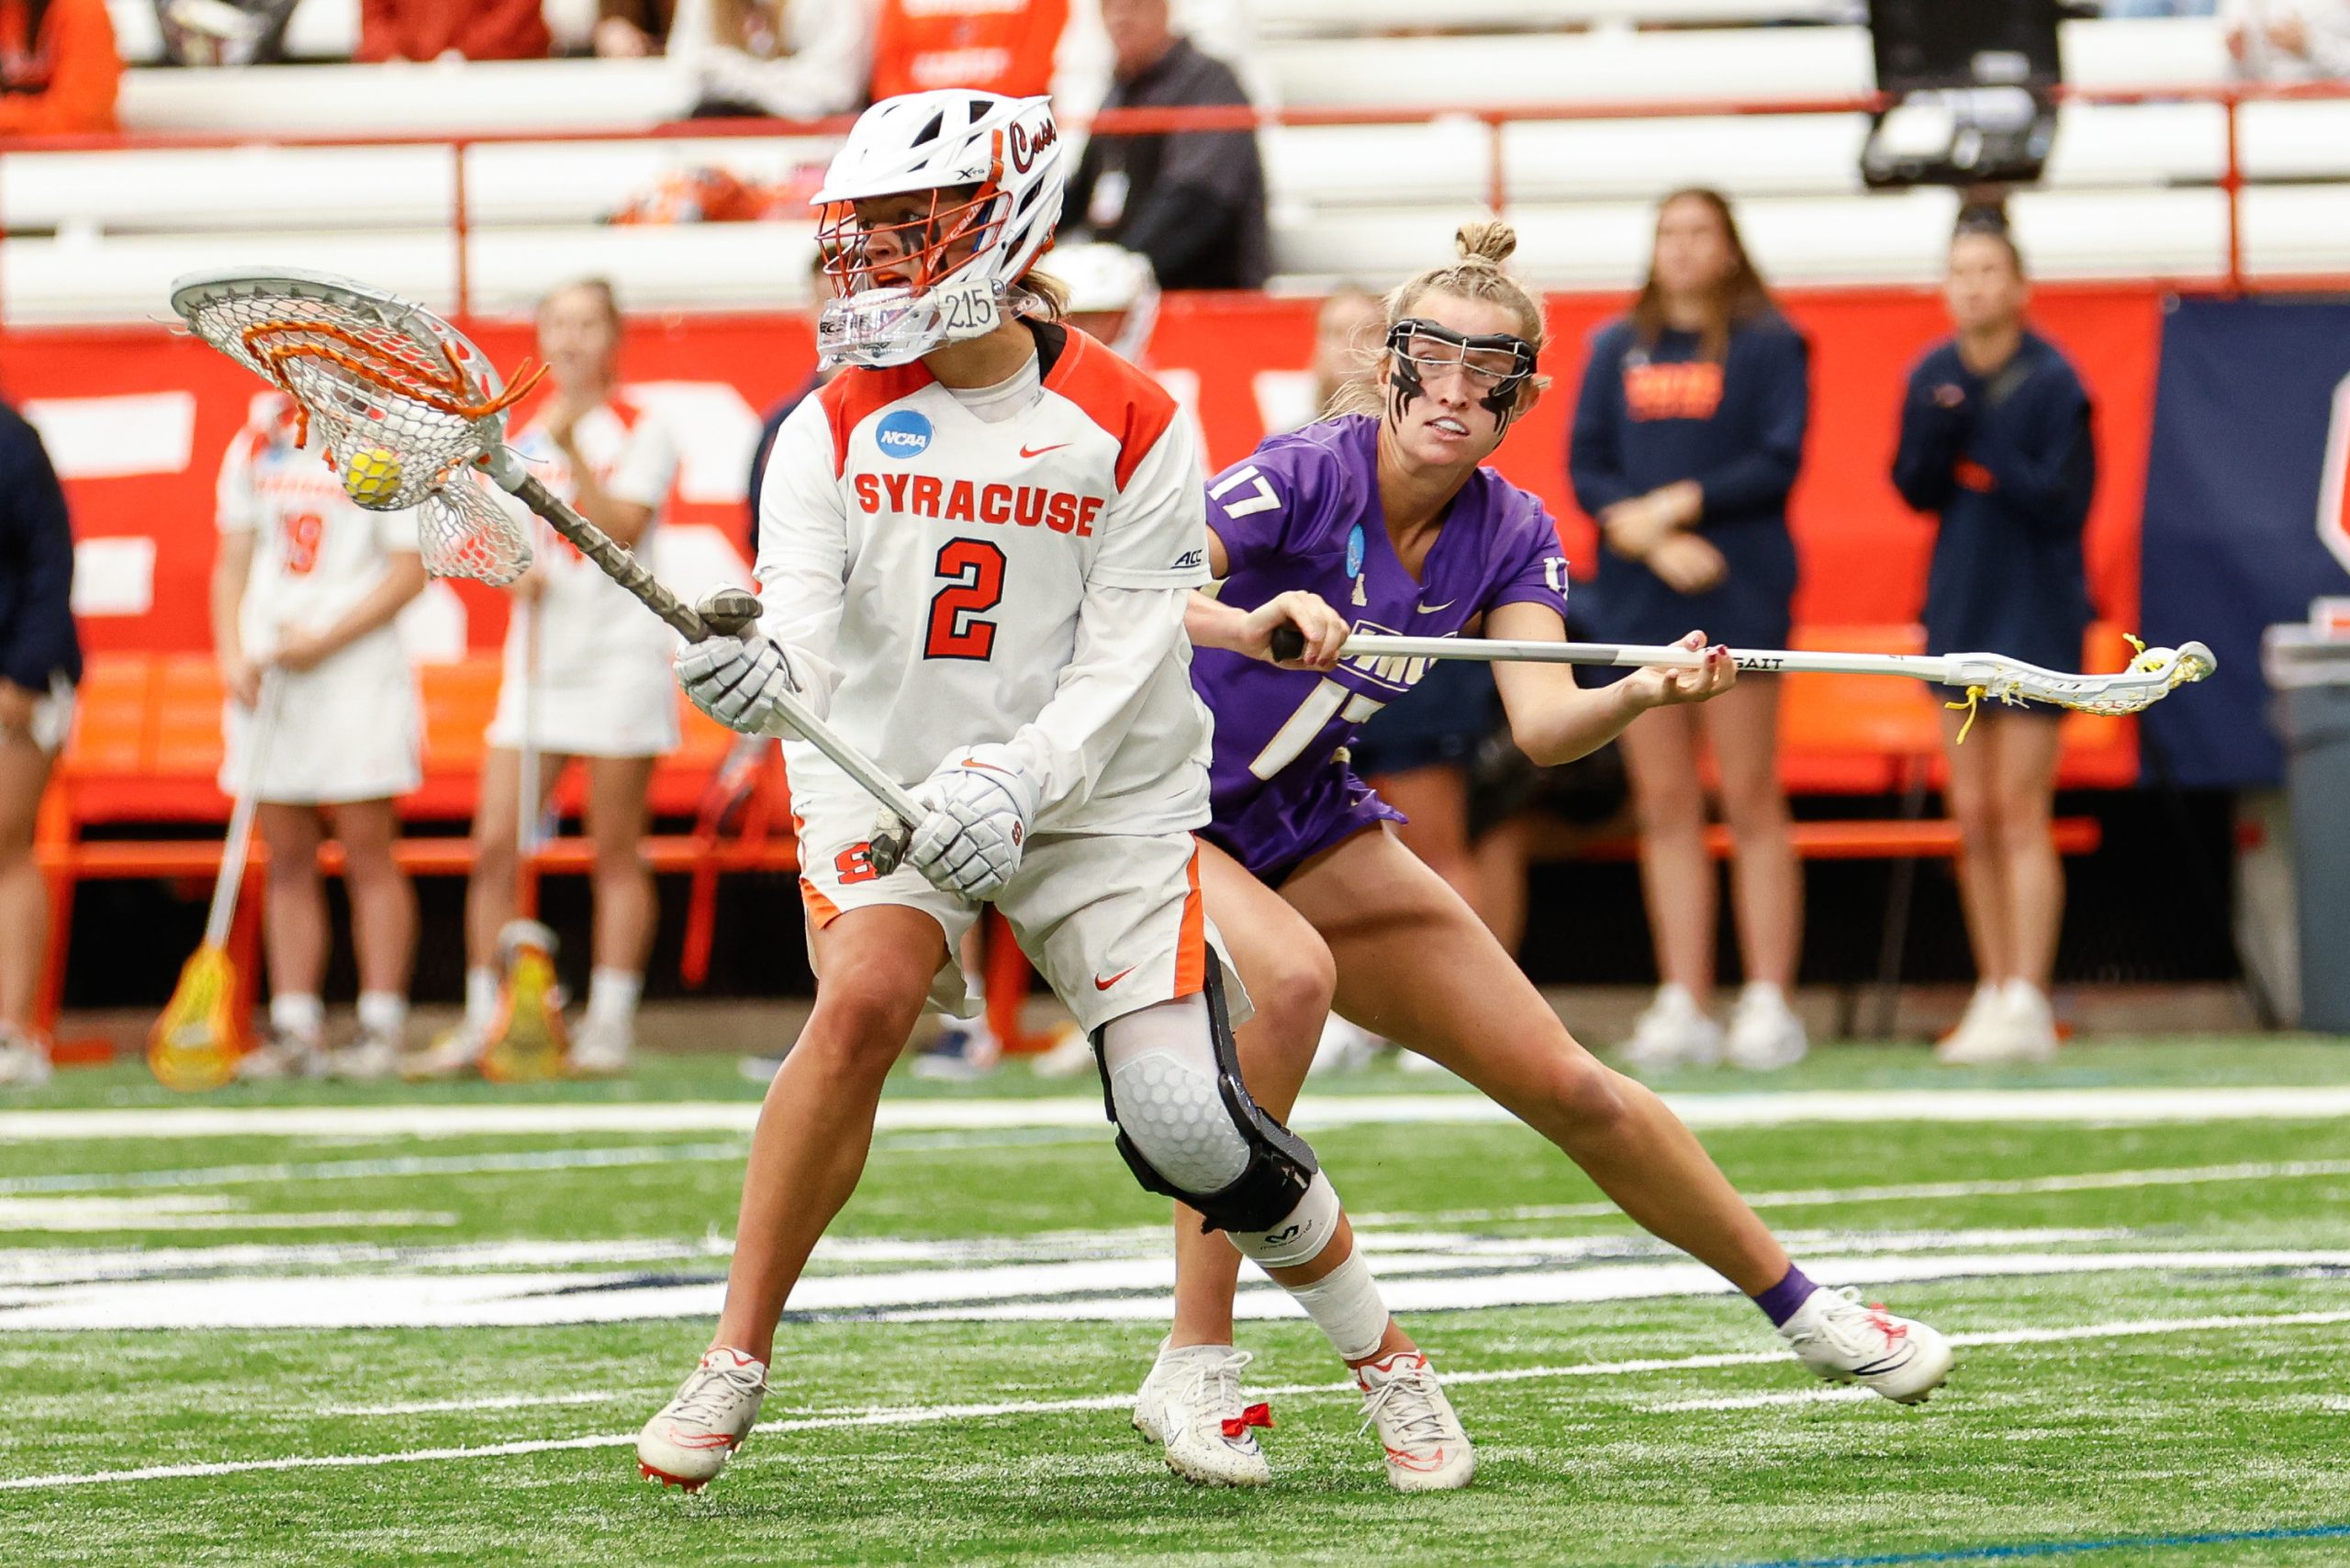 Syracuse goalkeeper Delaney Sweitzer (2) looks for an open teammate as James Madison's Isabella Peterson (17) tries to block during the NCAA Tournament quarterfinal on Thursday, May 18, 2023 at JMA Wireless Dome. Photo by Kayla Breen.